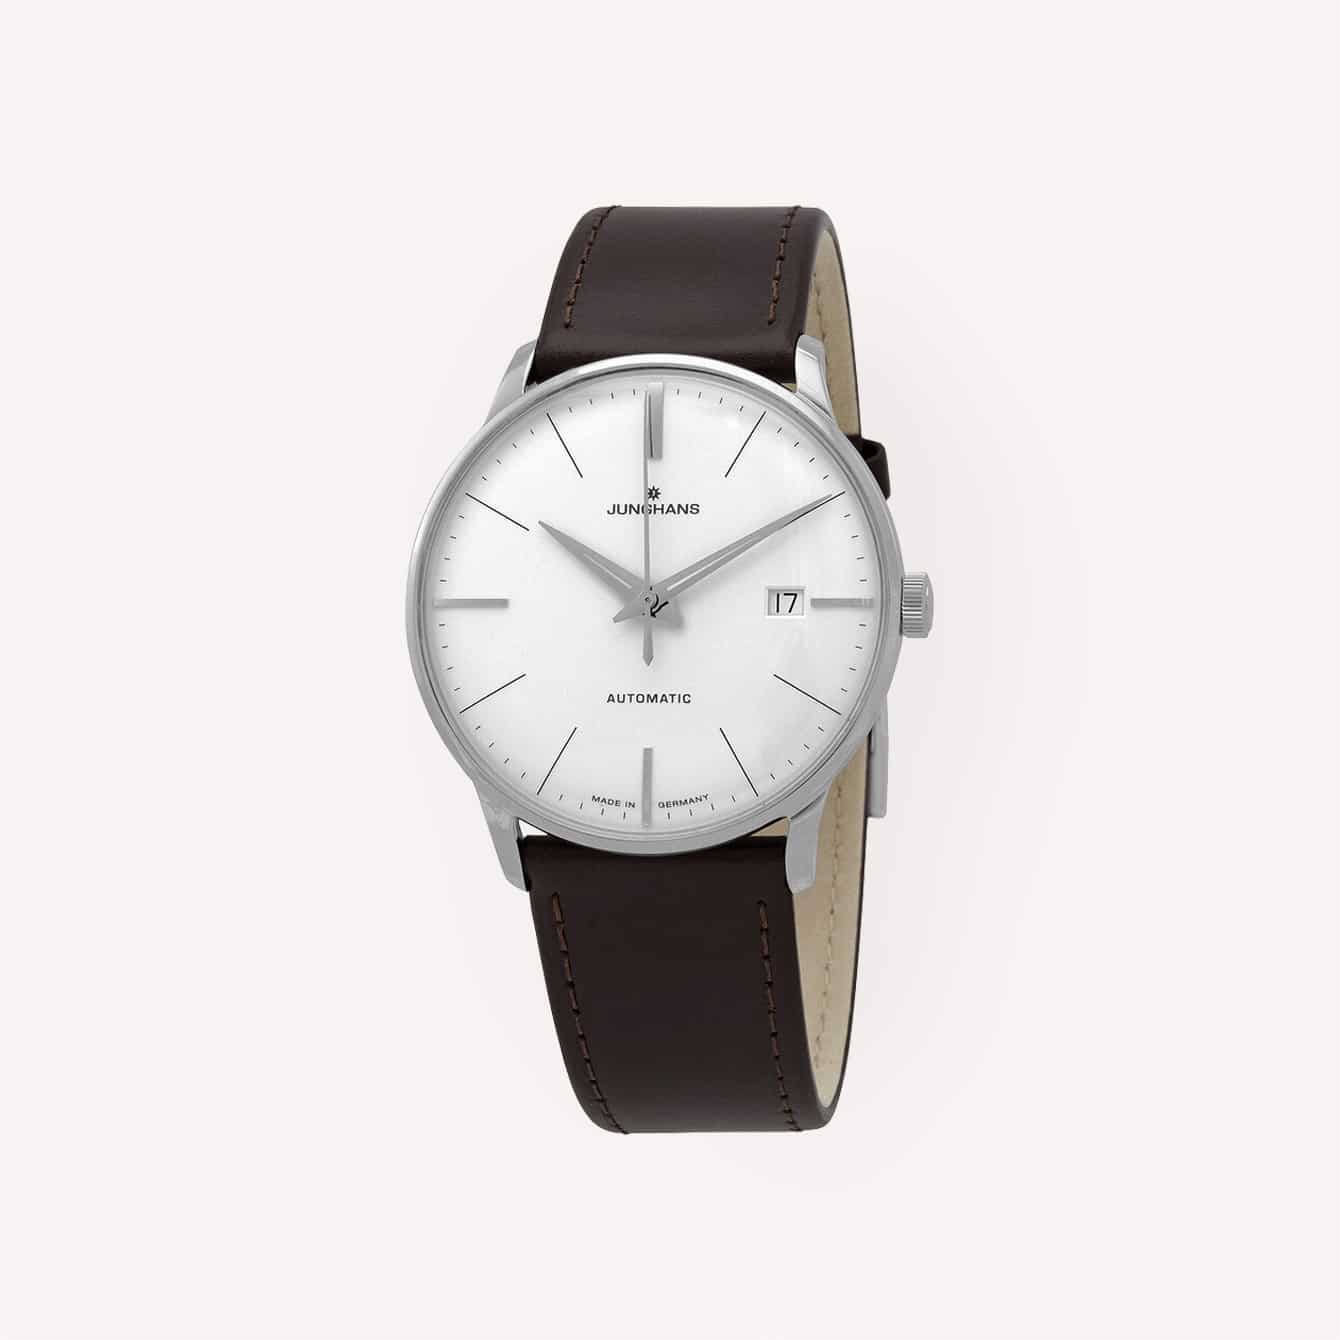 Top 15 Best Minimalist Watches to Buy [2023] - The Modest Man